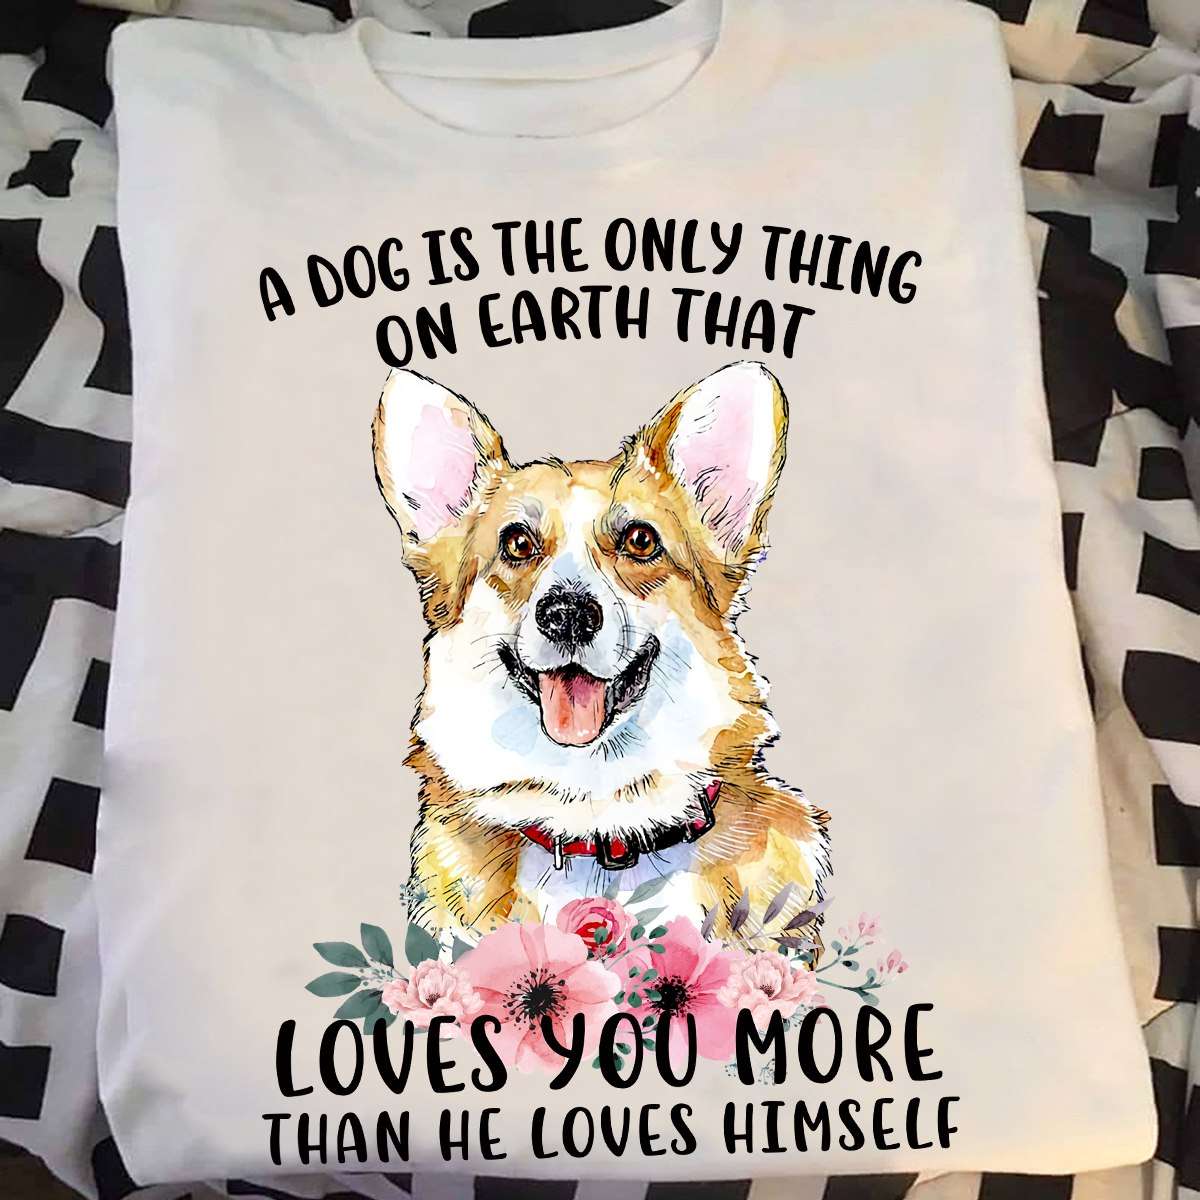 A dog is the only thing on earth that loves you more - Corgi dog, gift for dog lover